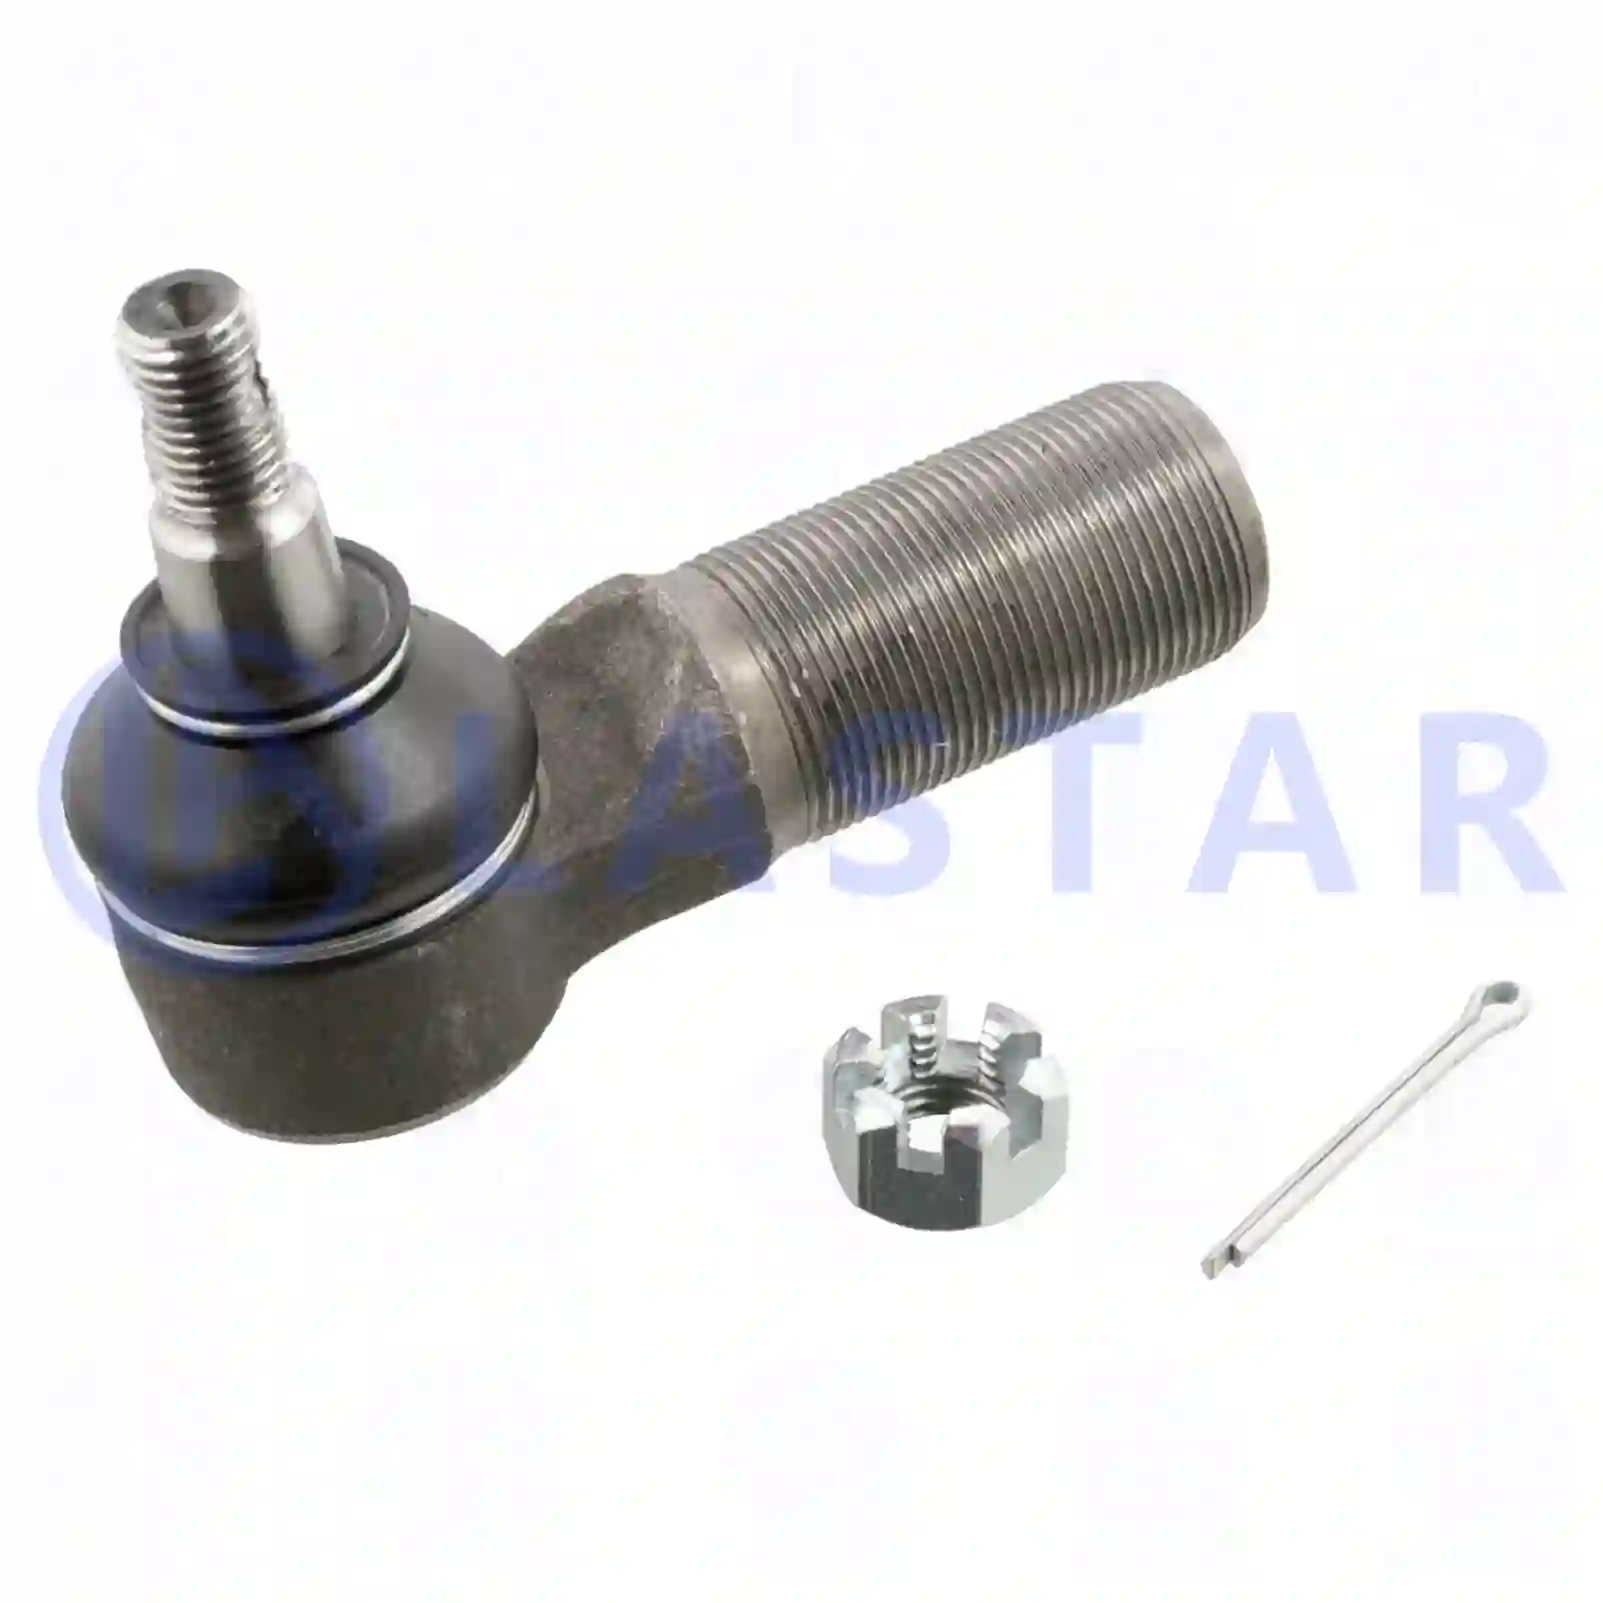 Gearbox Ball joint, right hand thread, la no: 77731871 ,  oem no:1527234, 1668638, 382745, ZG40140-0008, , , Lastar Spare Part | Truck Spare Parts, Auotomotive Spare Parts